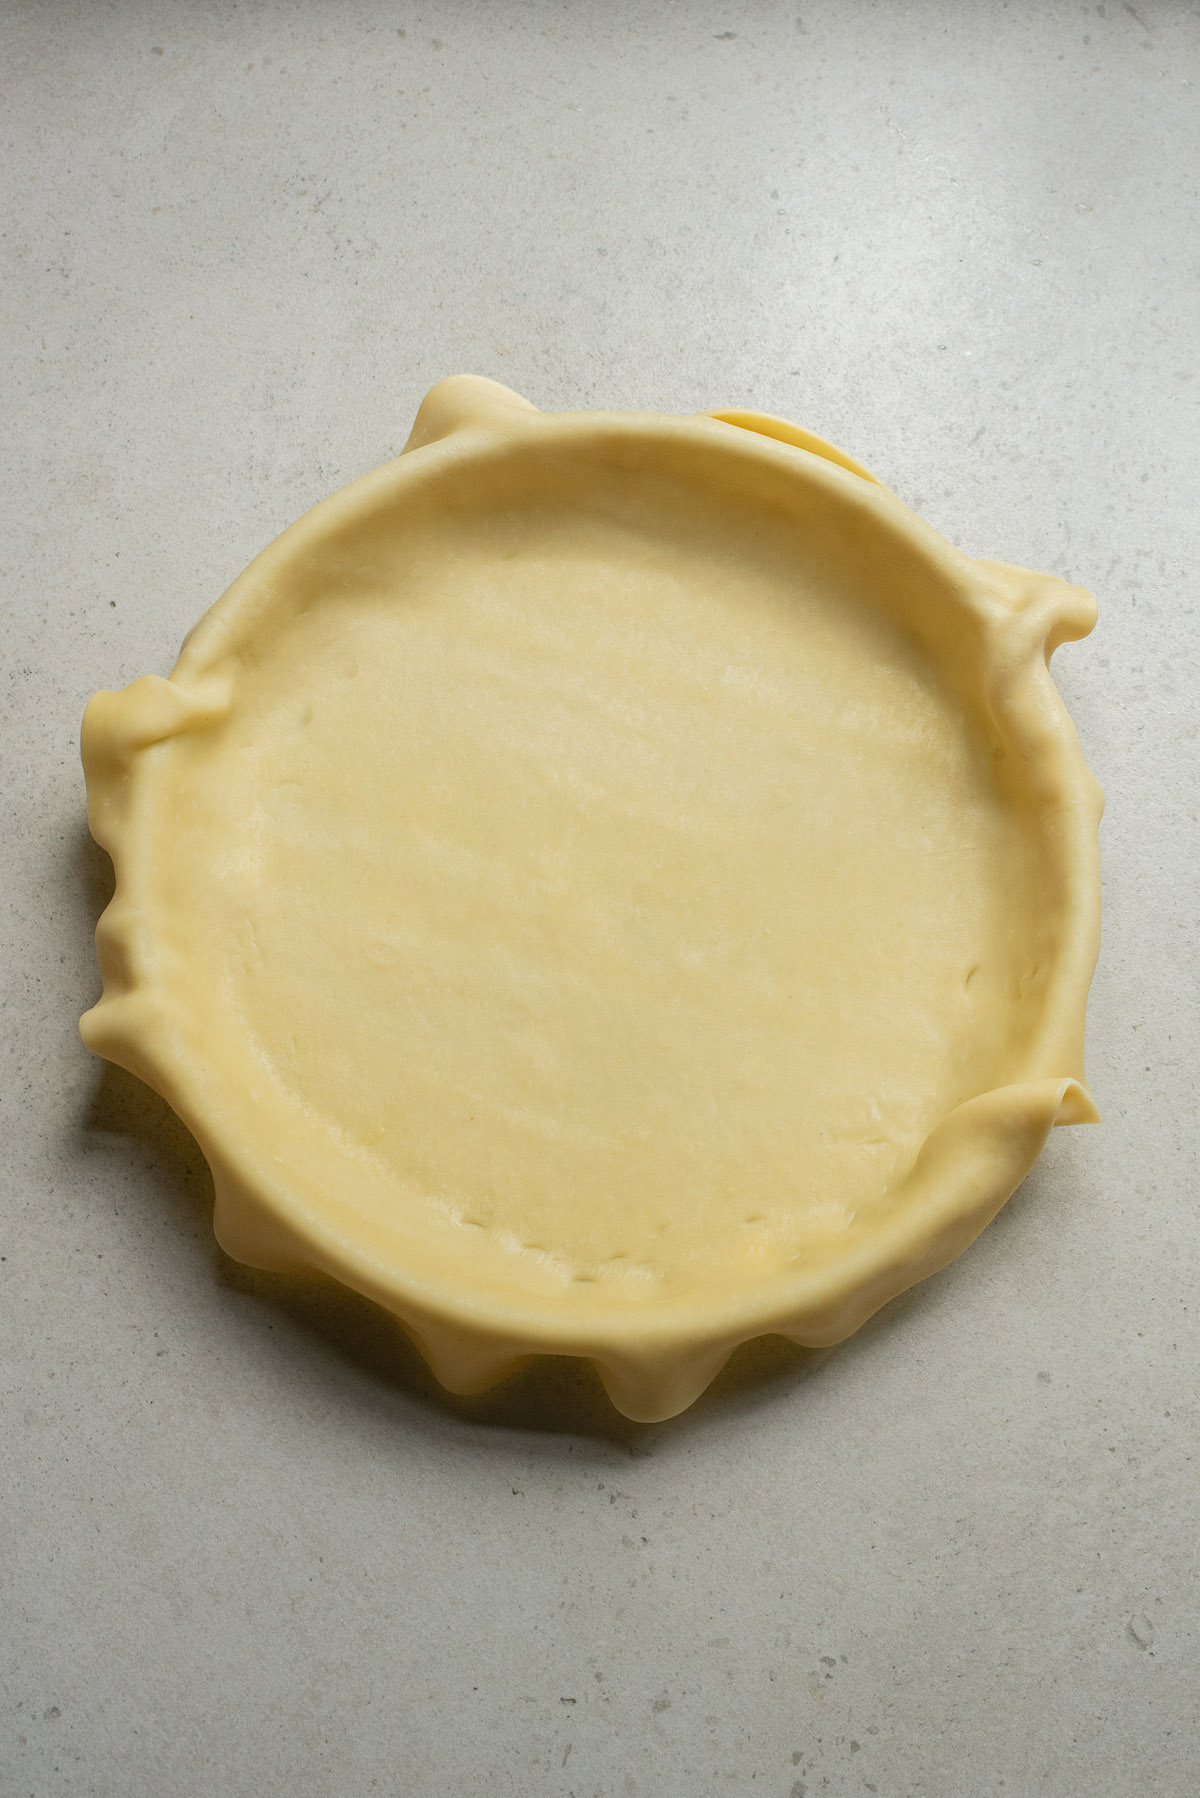 one pie crust placed inside a pie baking dish